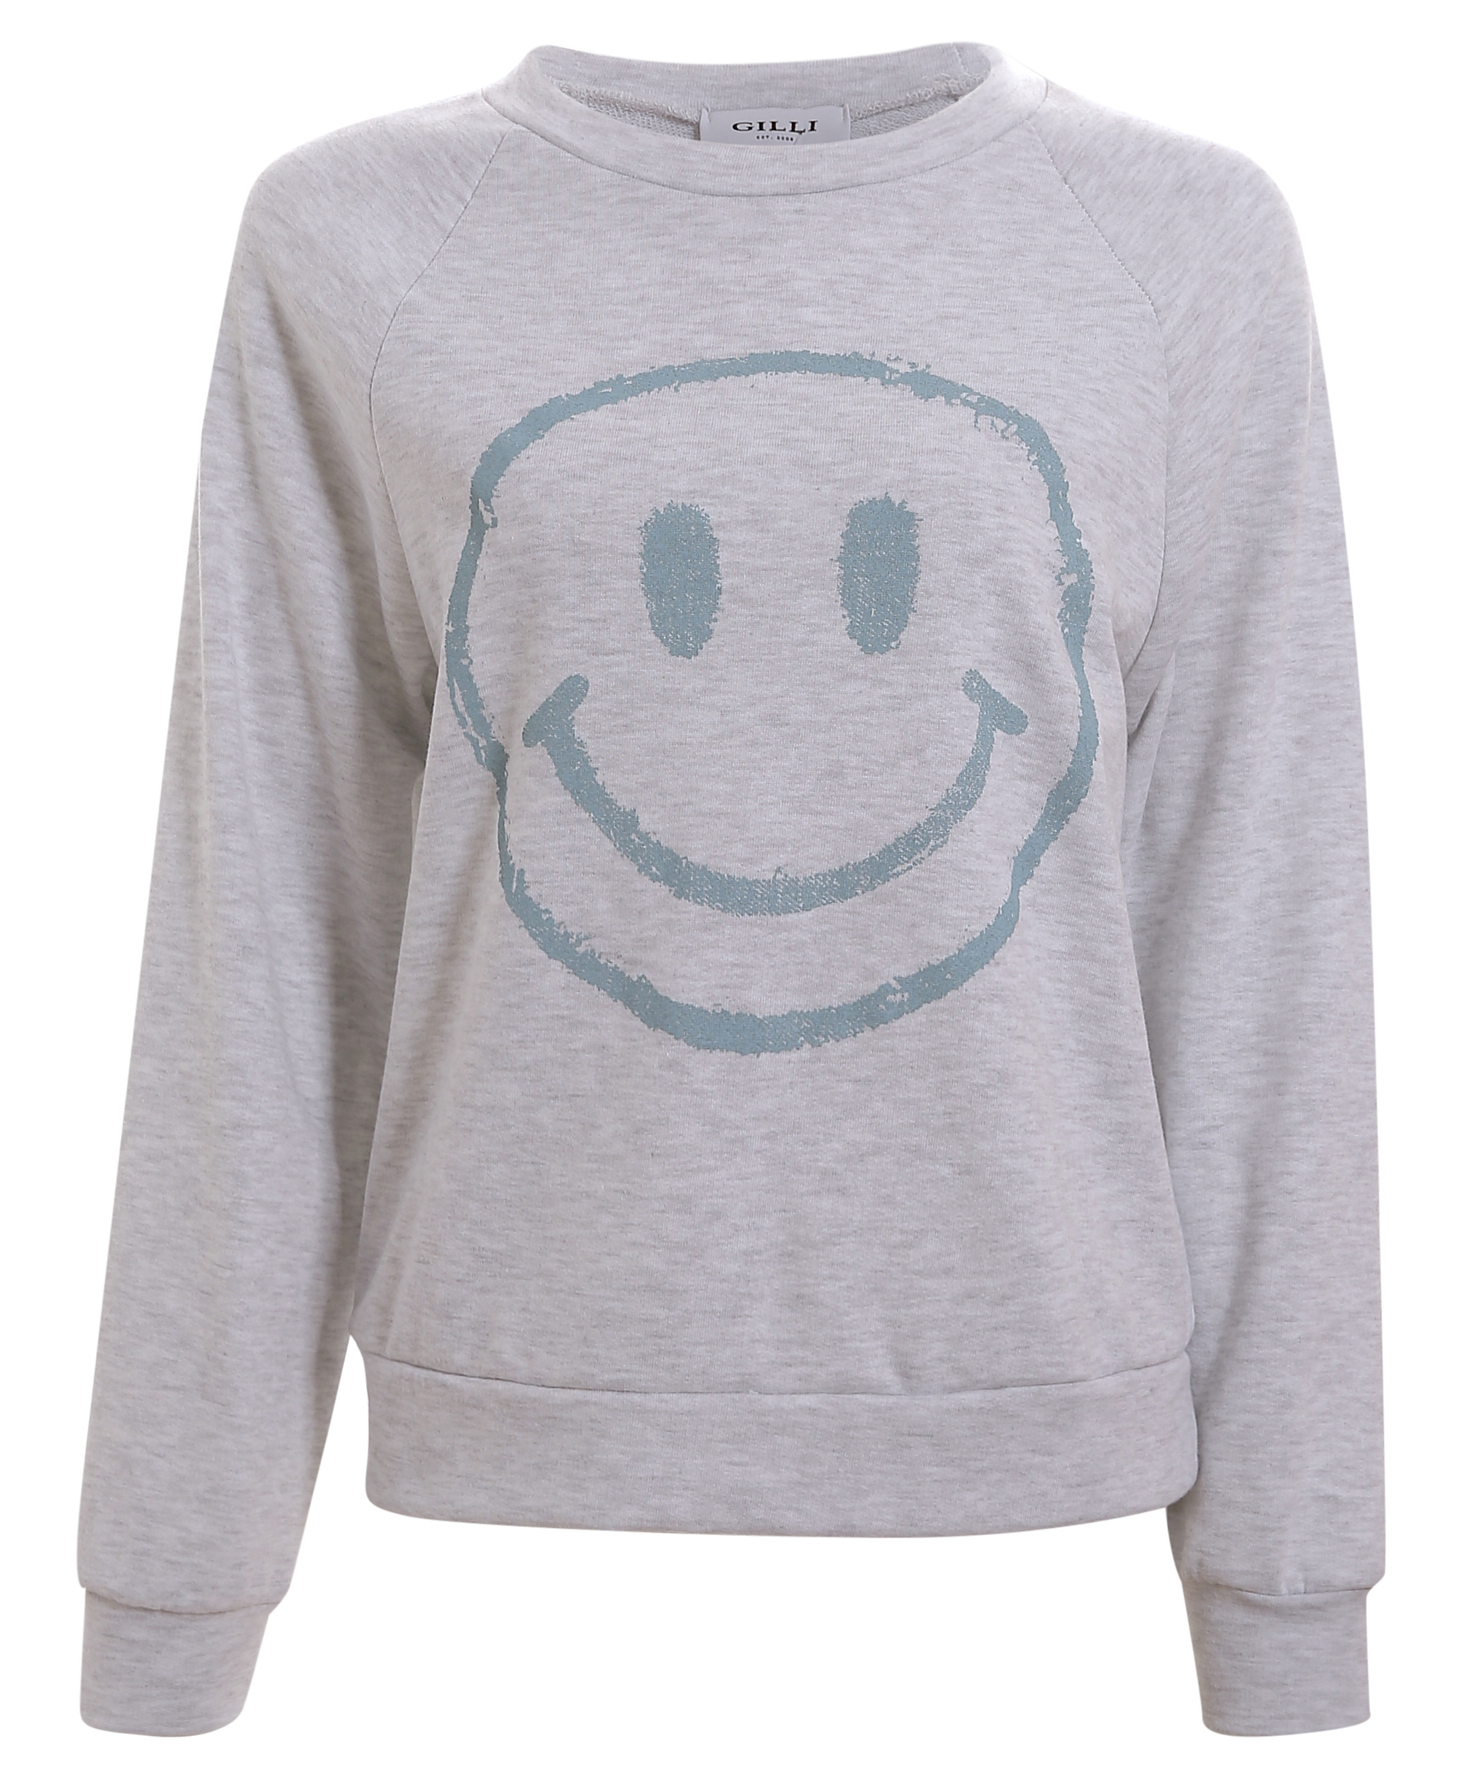 Smiley Face Graphic Print Top